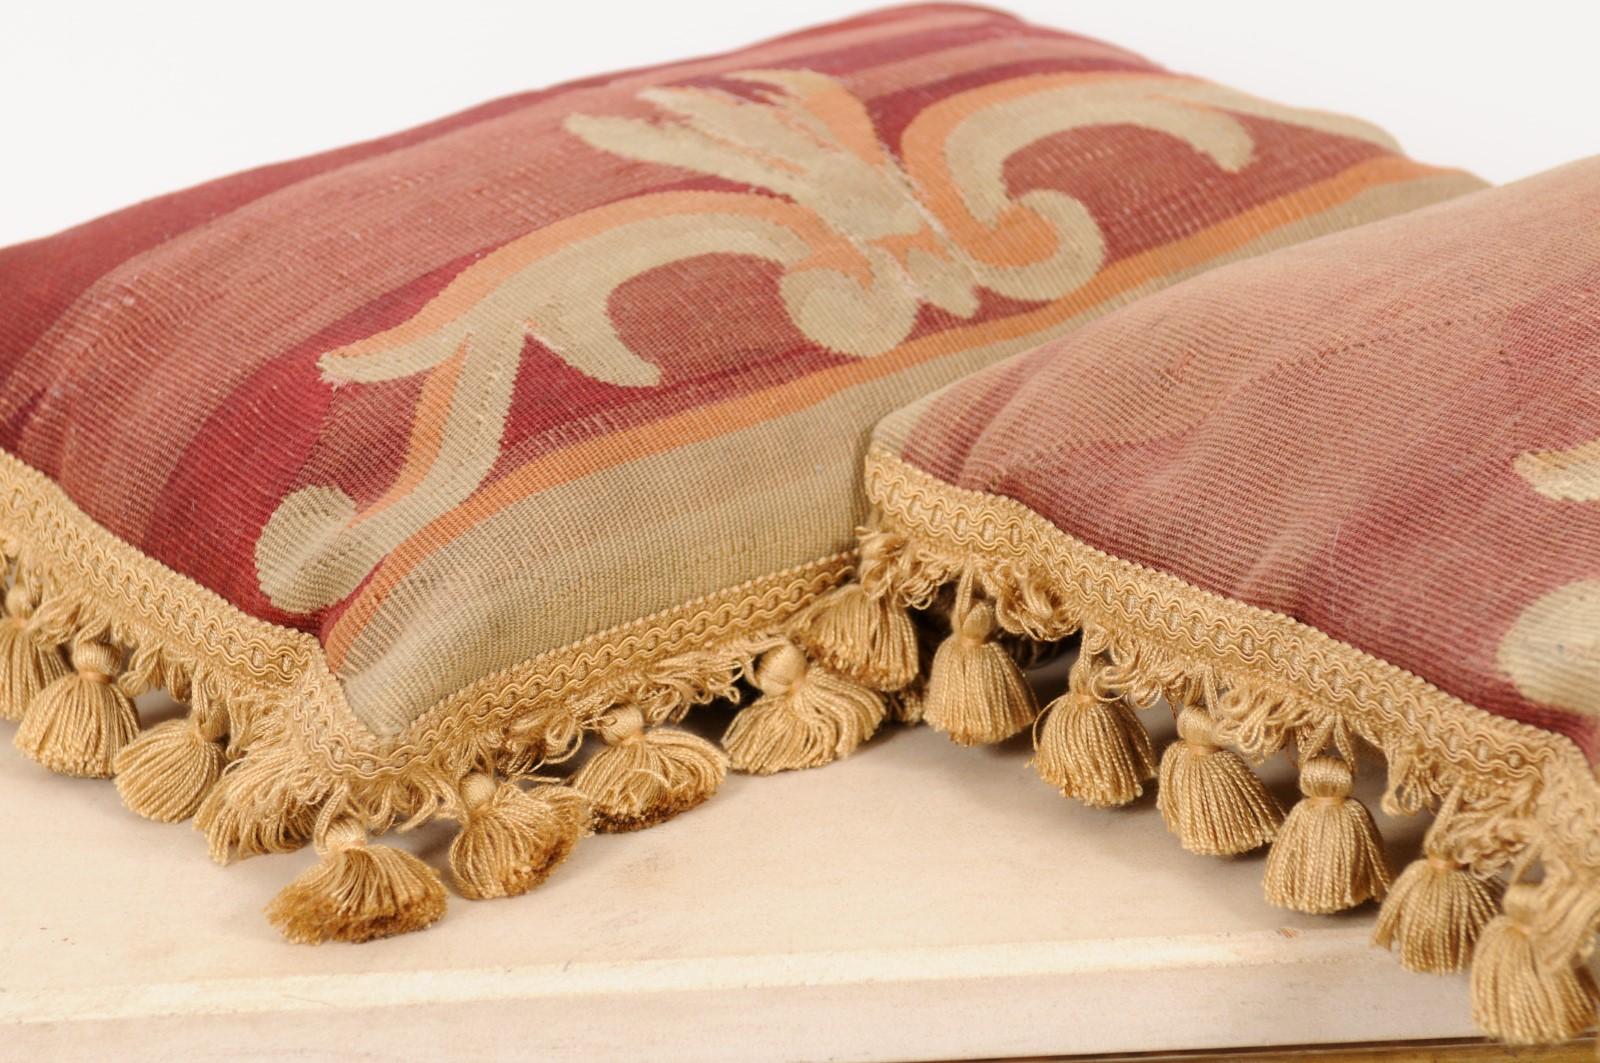 19th Century French Aubusson Tapestry Pillow with Foliage and Petite Tassels For Sale 7